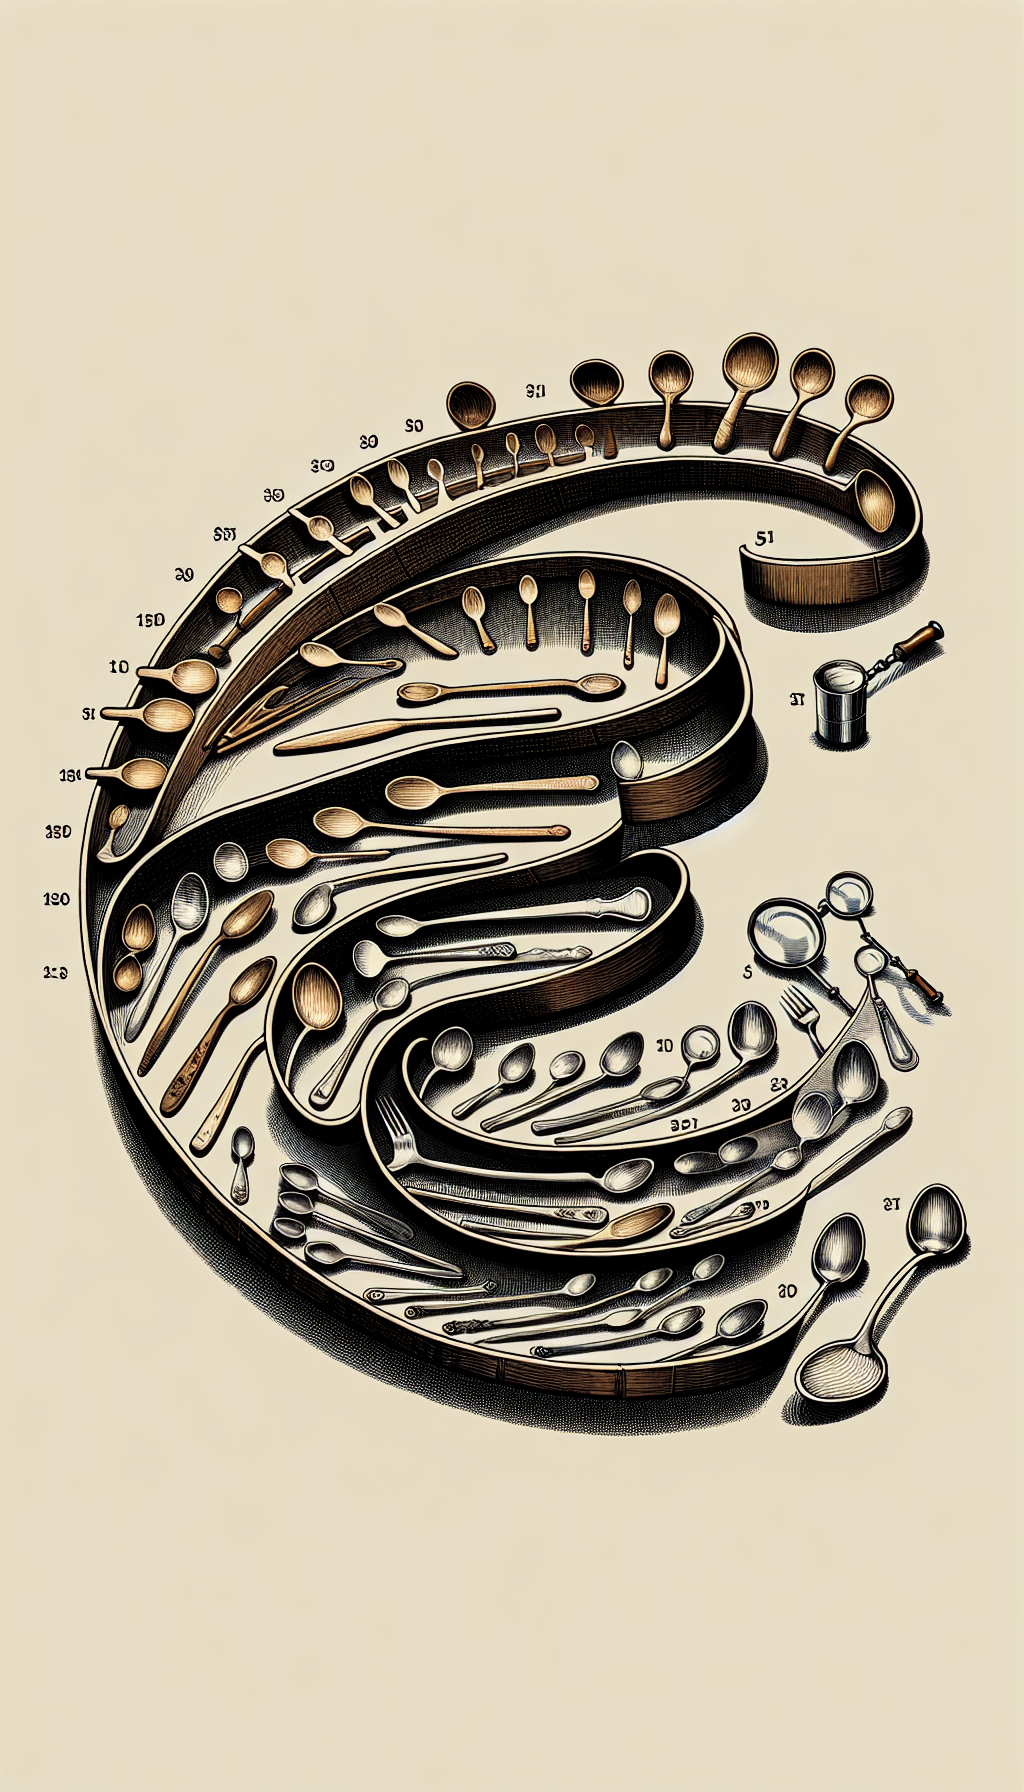 An illustration depicts a spiraling timeline unfurling like a ribbon, with intricately drawn spoons from different eras along its length, morphing from crude medieval wooden designs to sleek, contemporary silverware. Near each spoon, a magnifying glass hovers, pinpointing unique identifying features, while styles transition from woodcut to digital rendering as the timeline progresses.